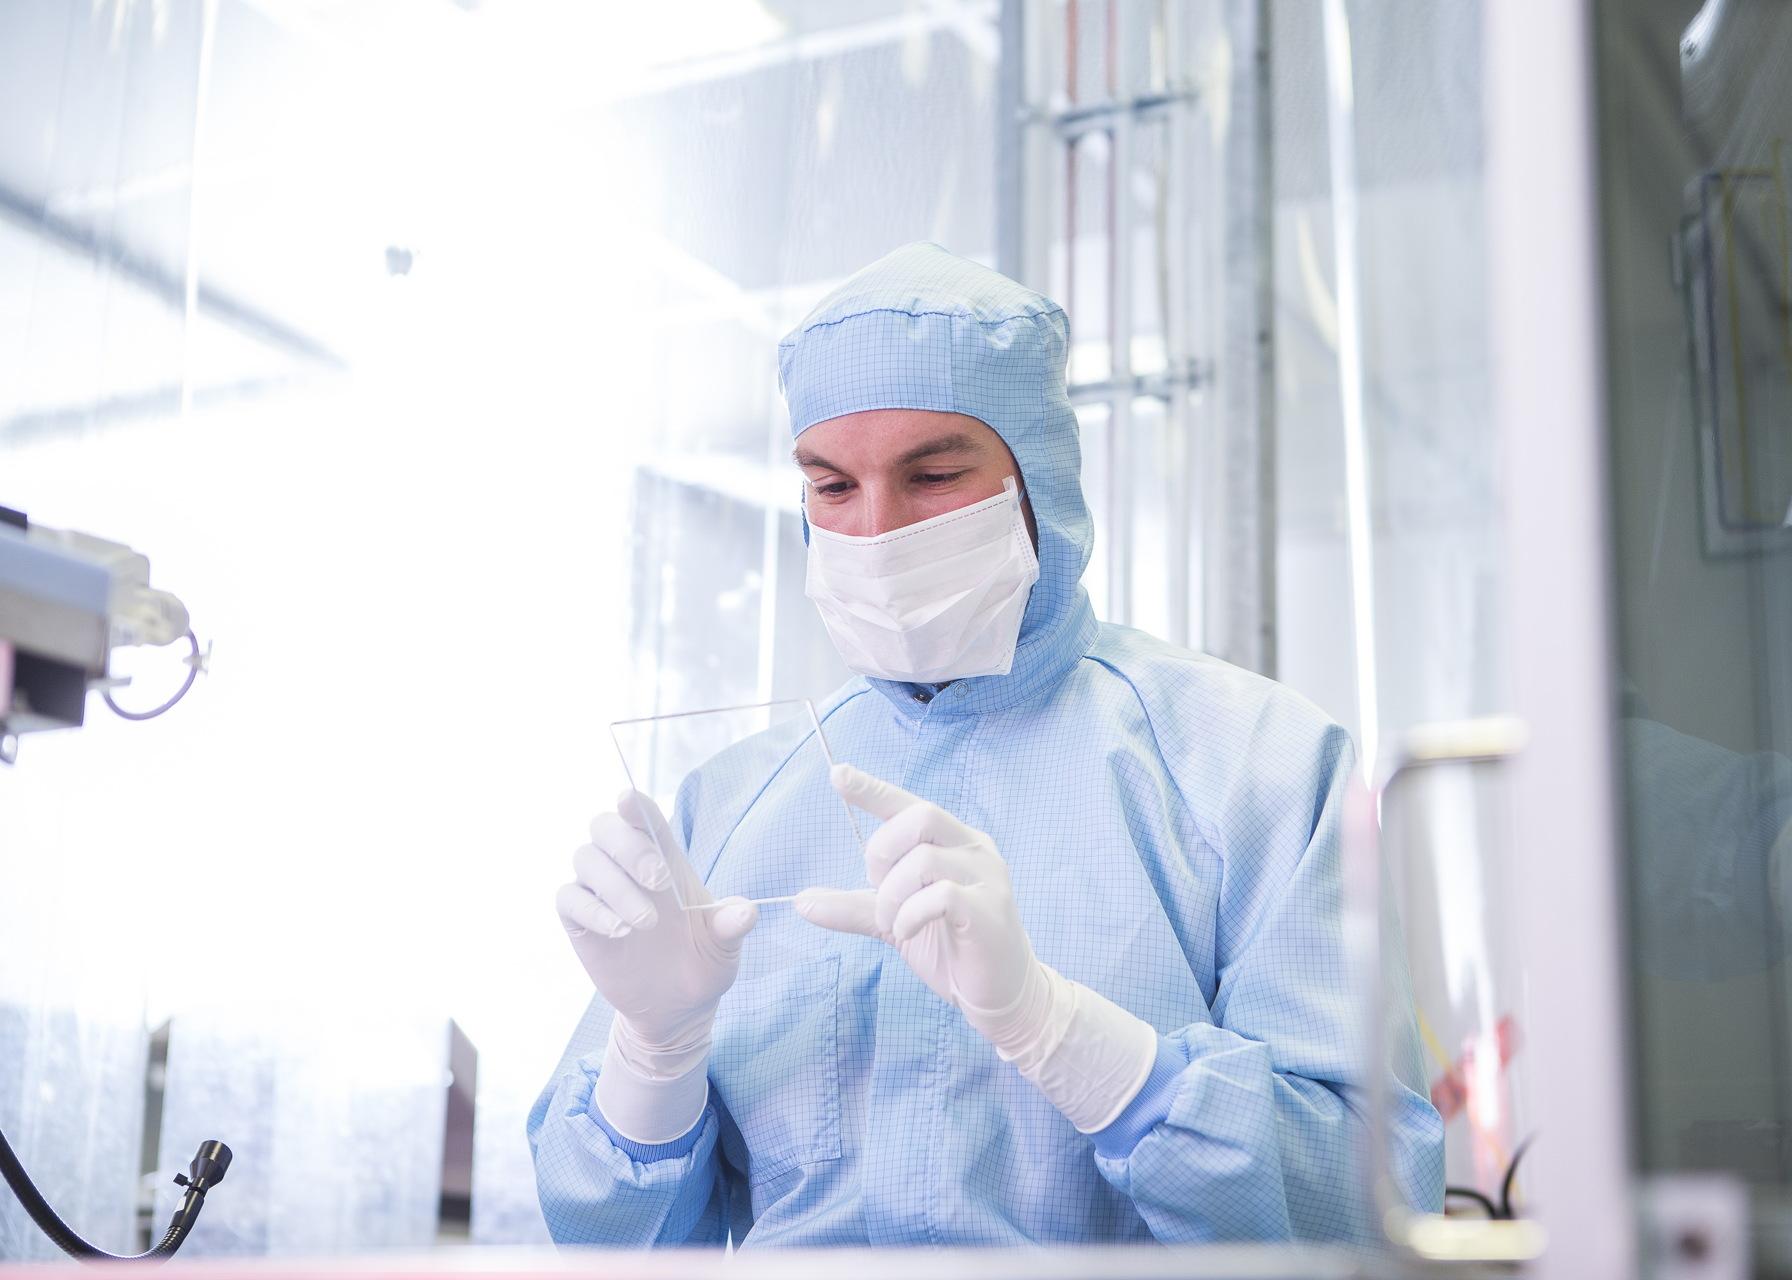 Laboratory scientist in cleanroom clothing inspects a glass sample